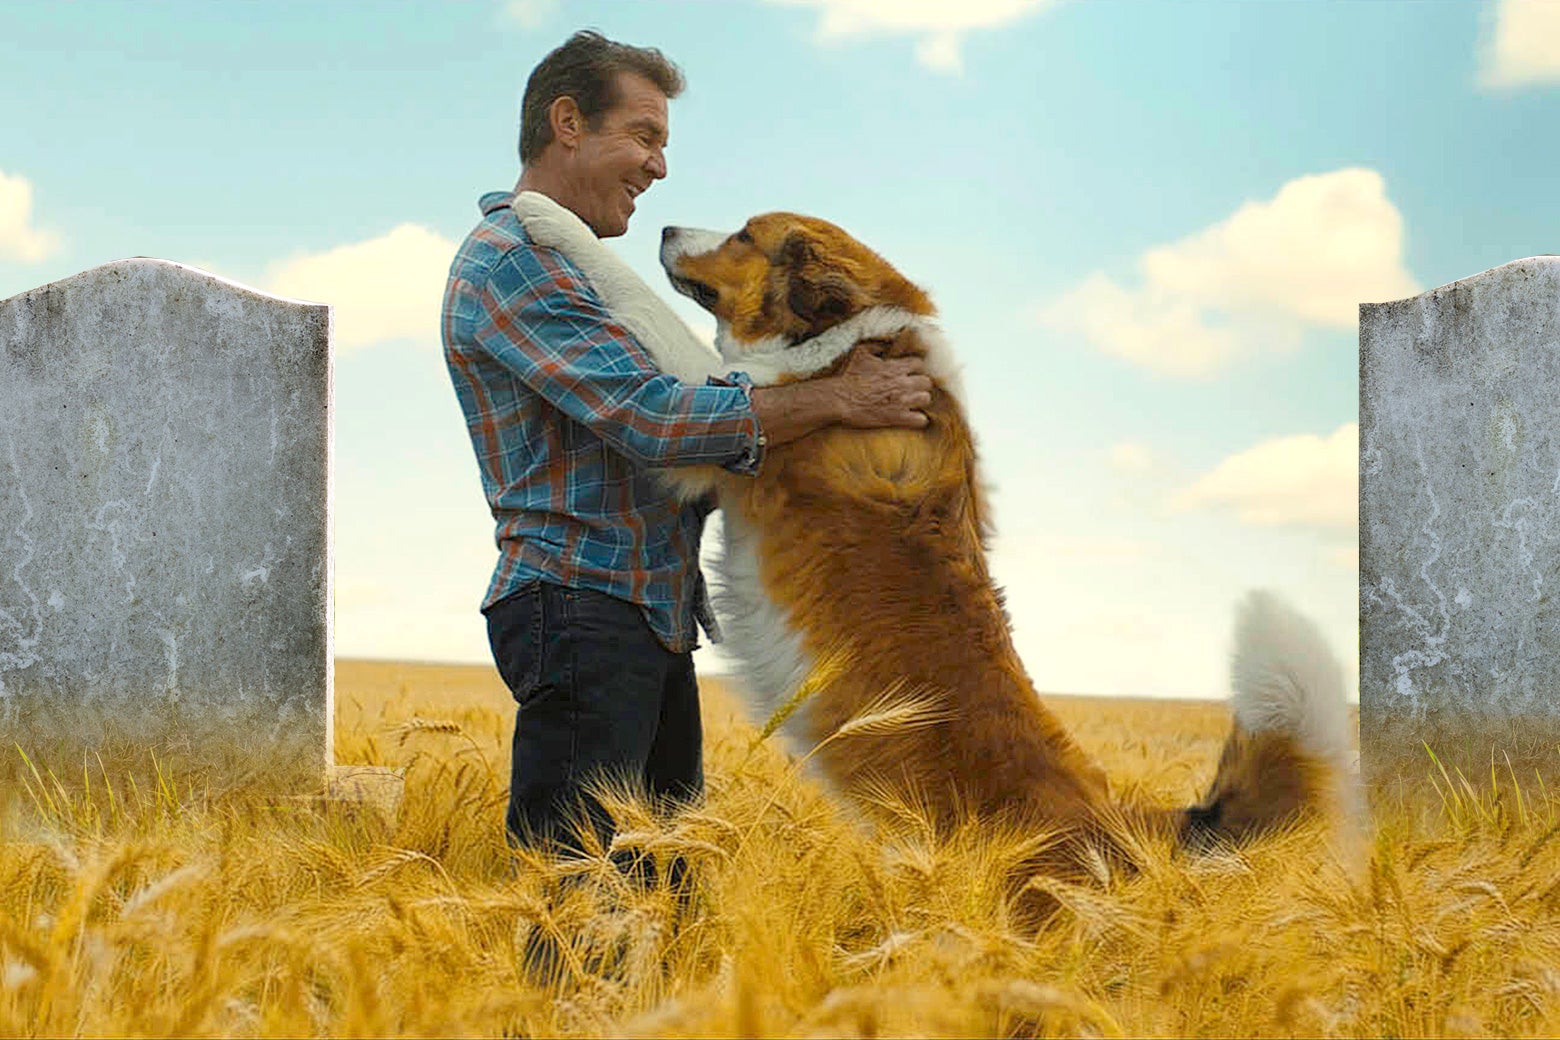 a dogs purpose dog video